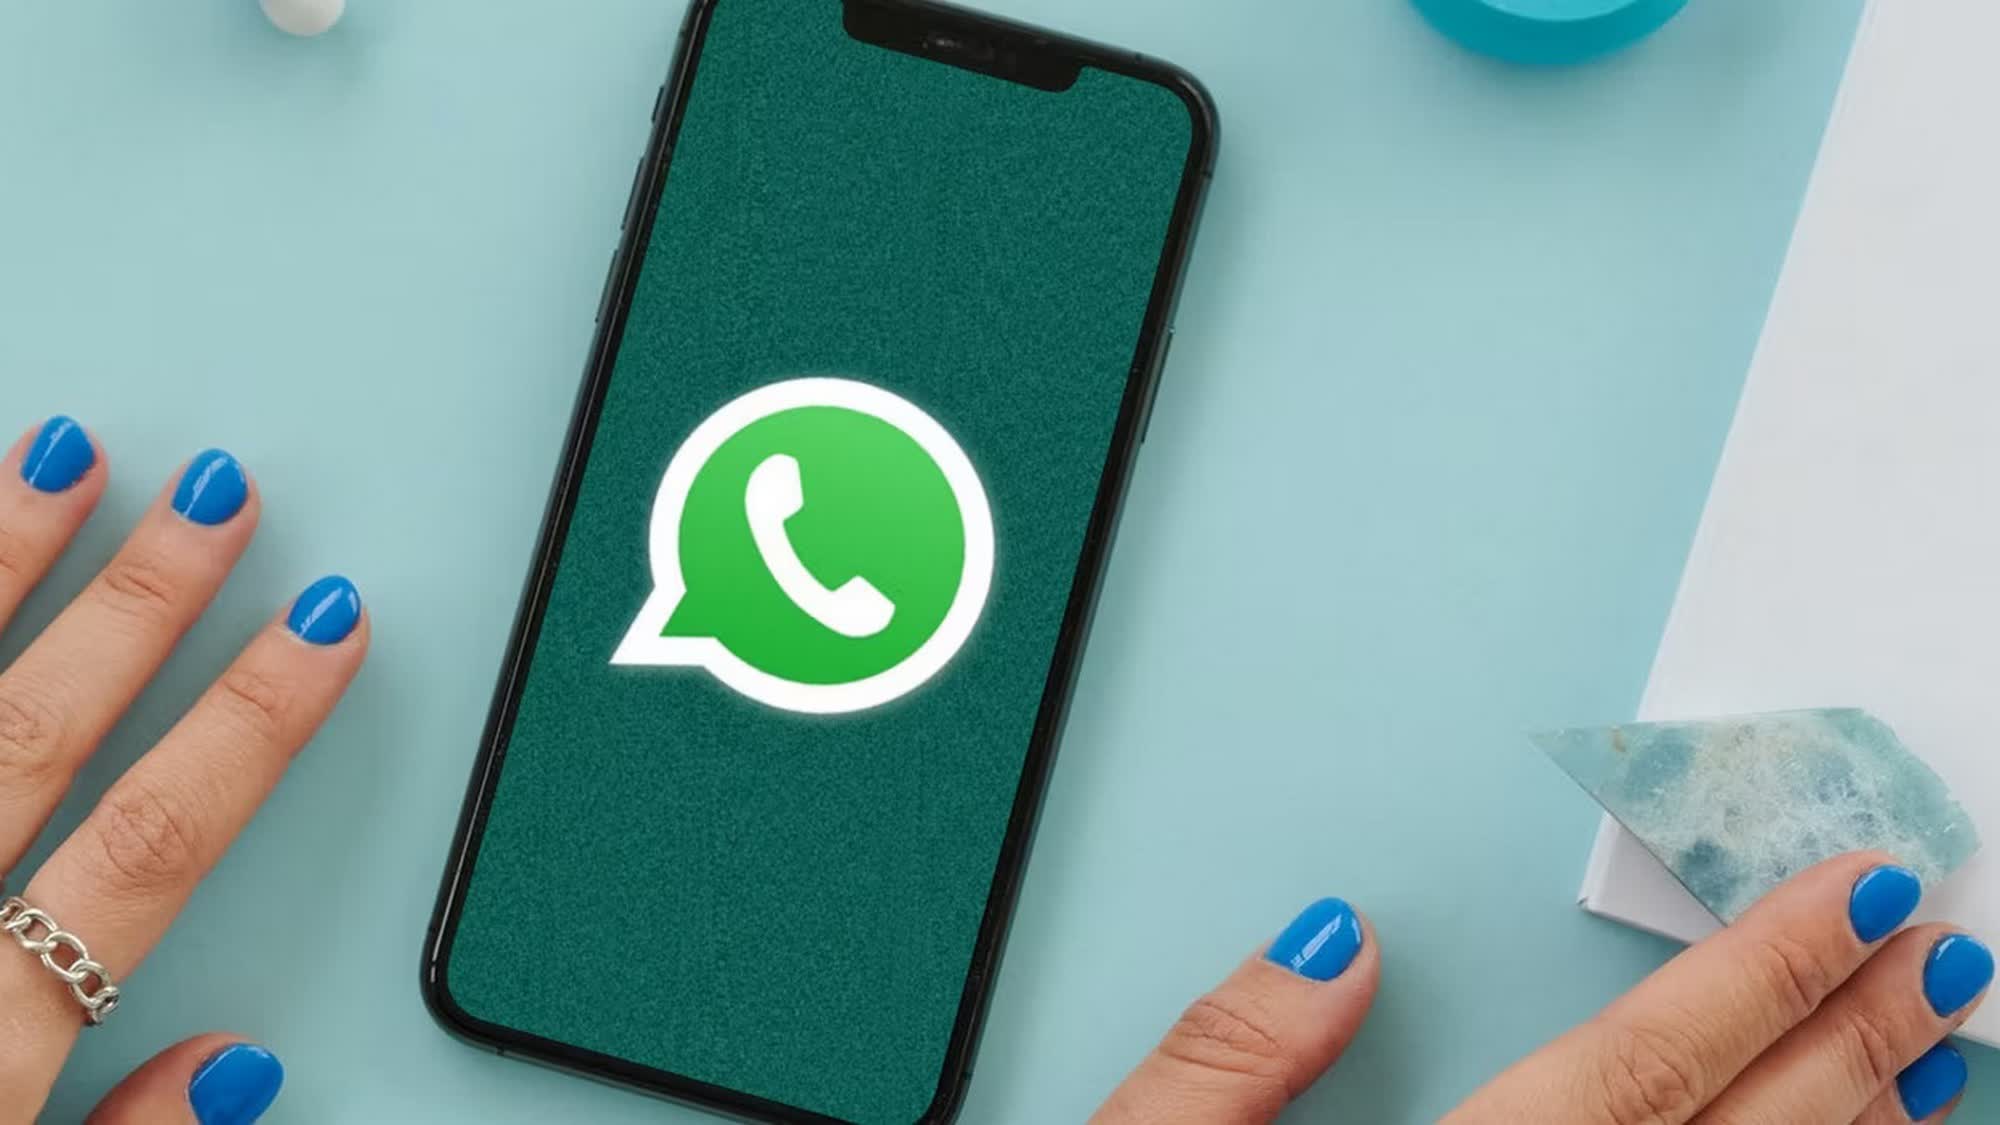 WhatsApp will soon offer third-party chat support to comply with the EU